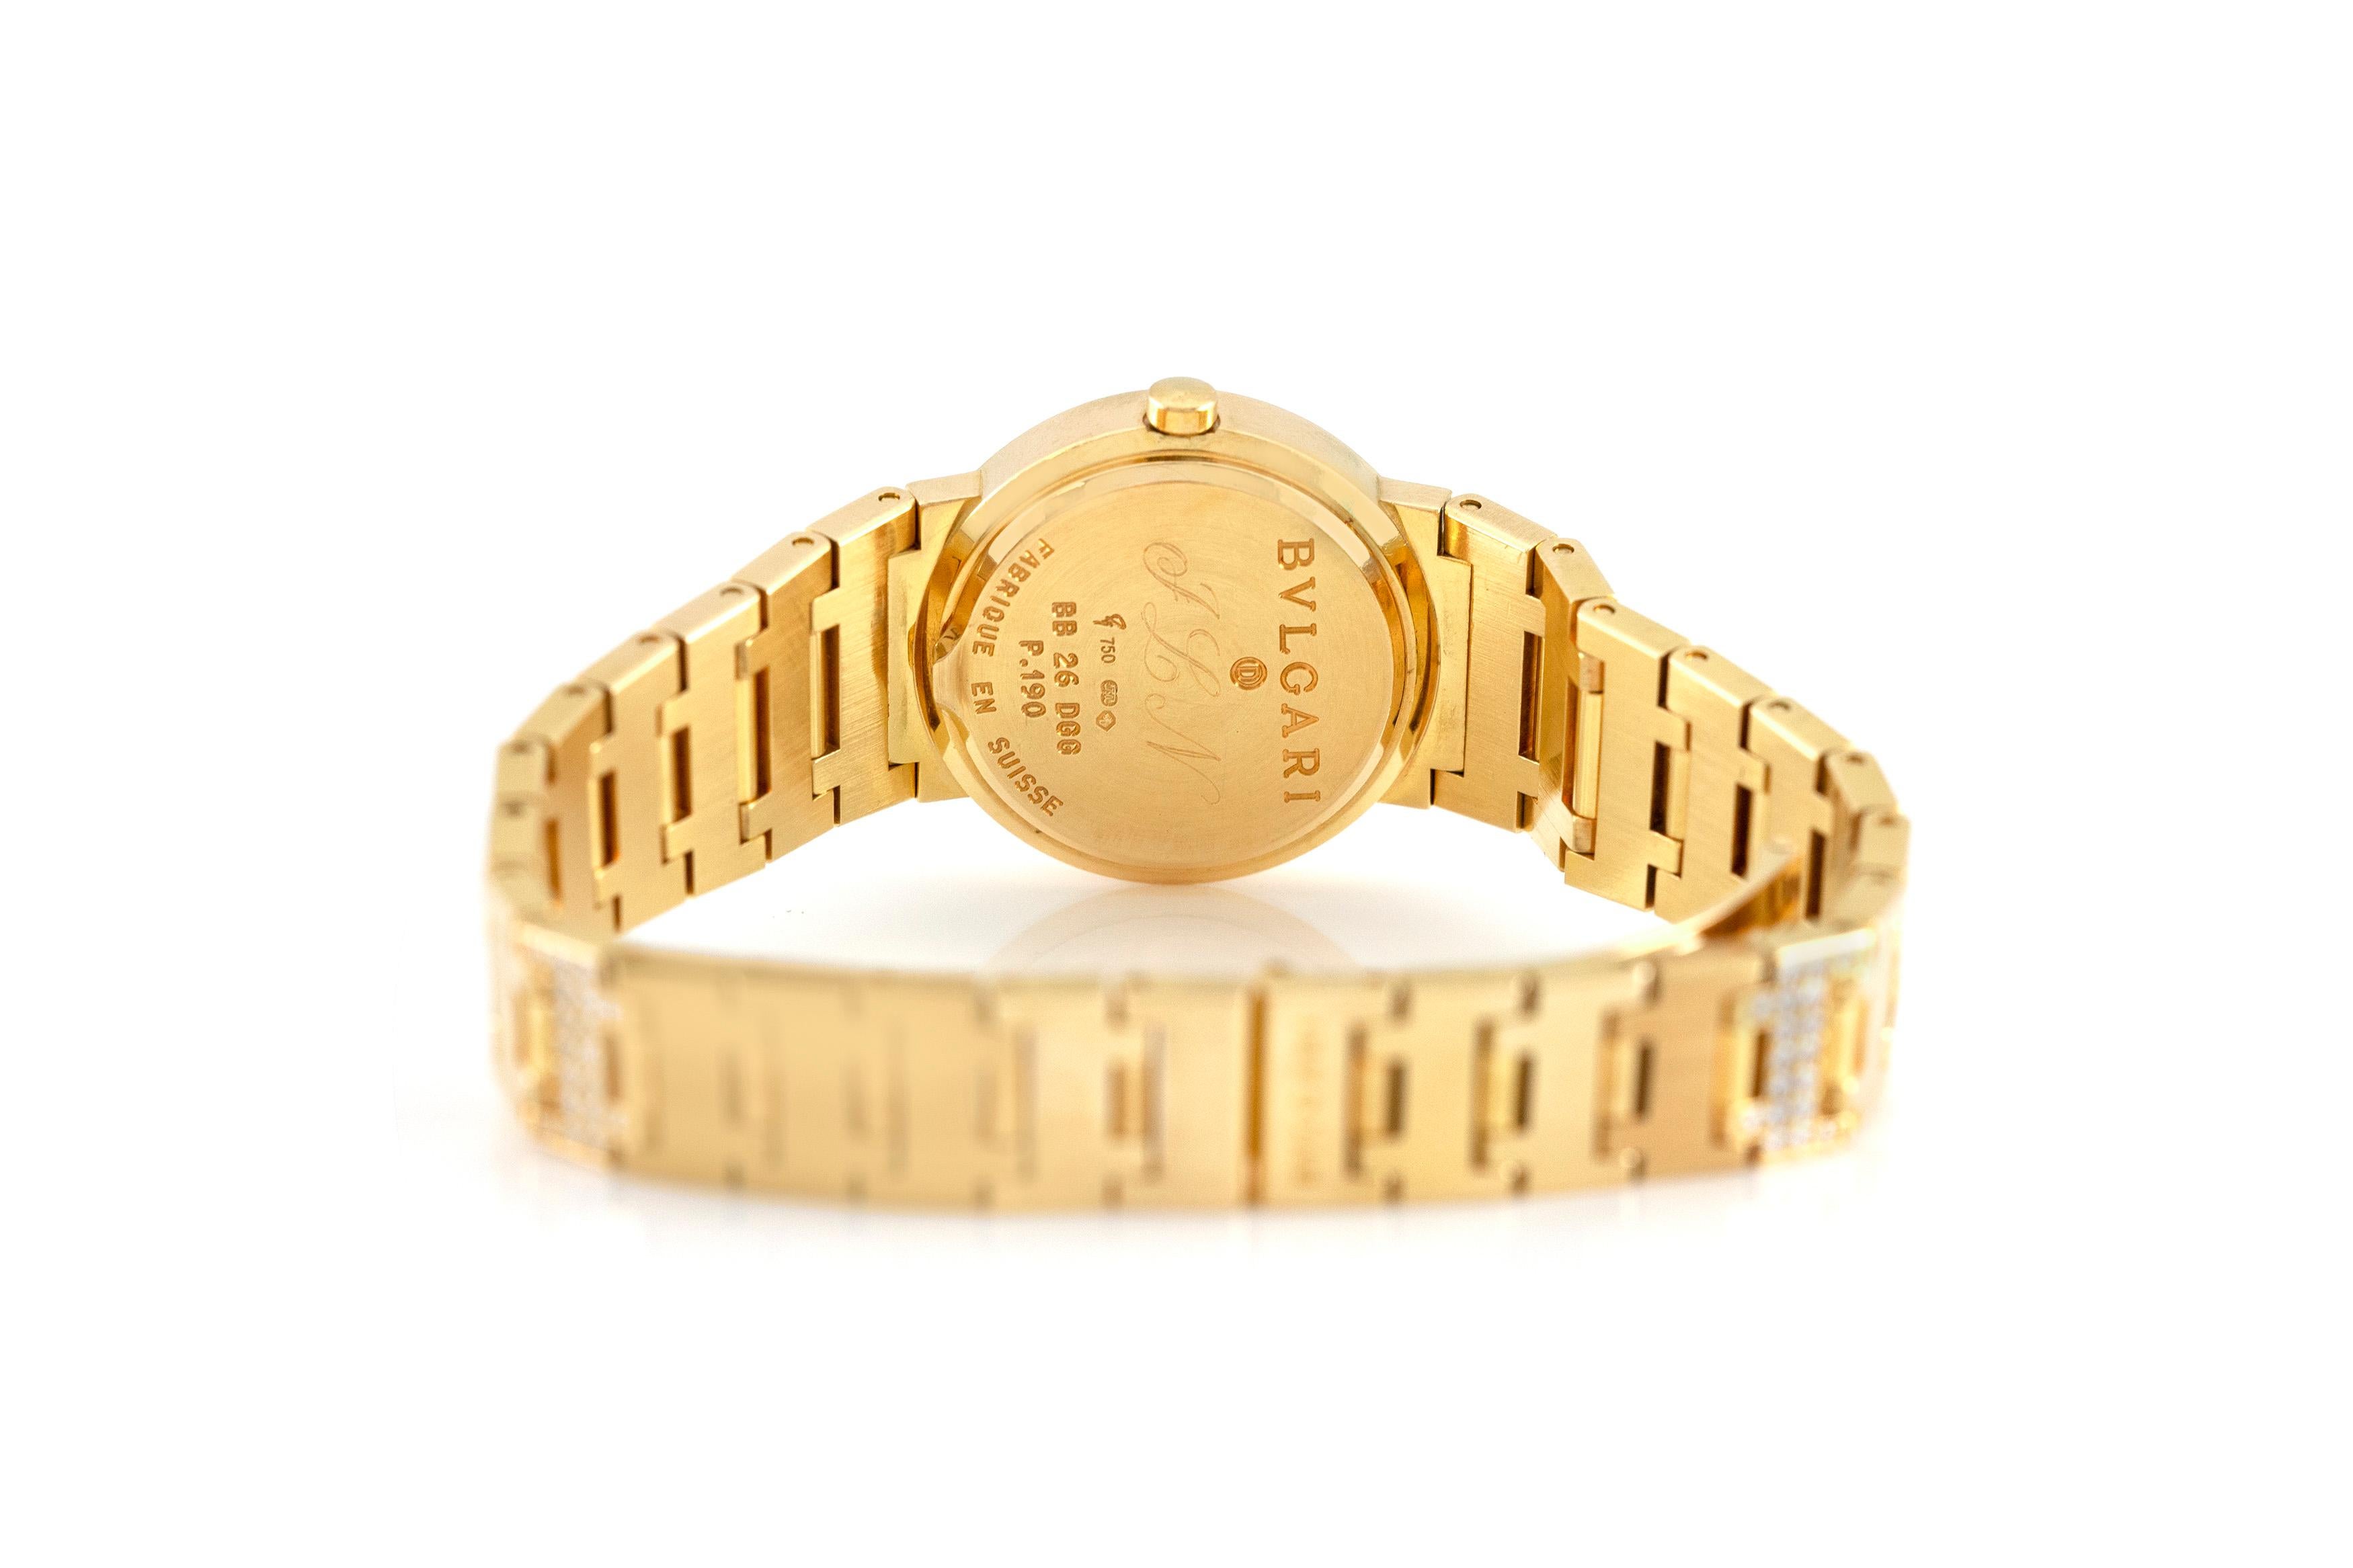 The watch is finely crafted in 18k yellow gold with diamonds .

Sign by BVLGARI